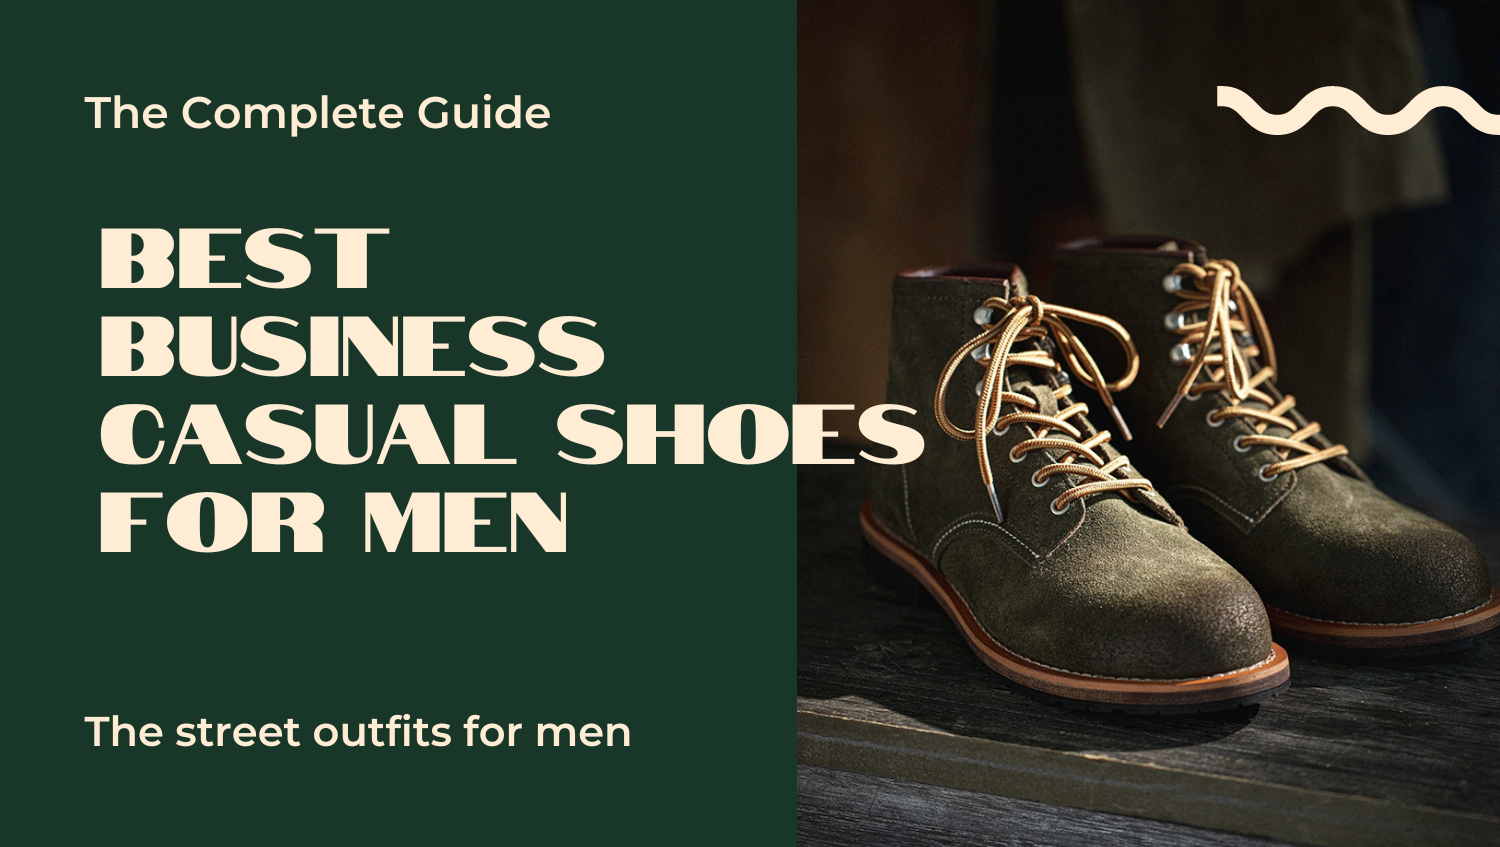 The Complete Guide to Choosing the Best Business Casual Shoes for Men